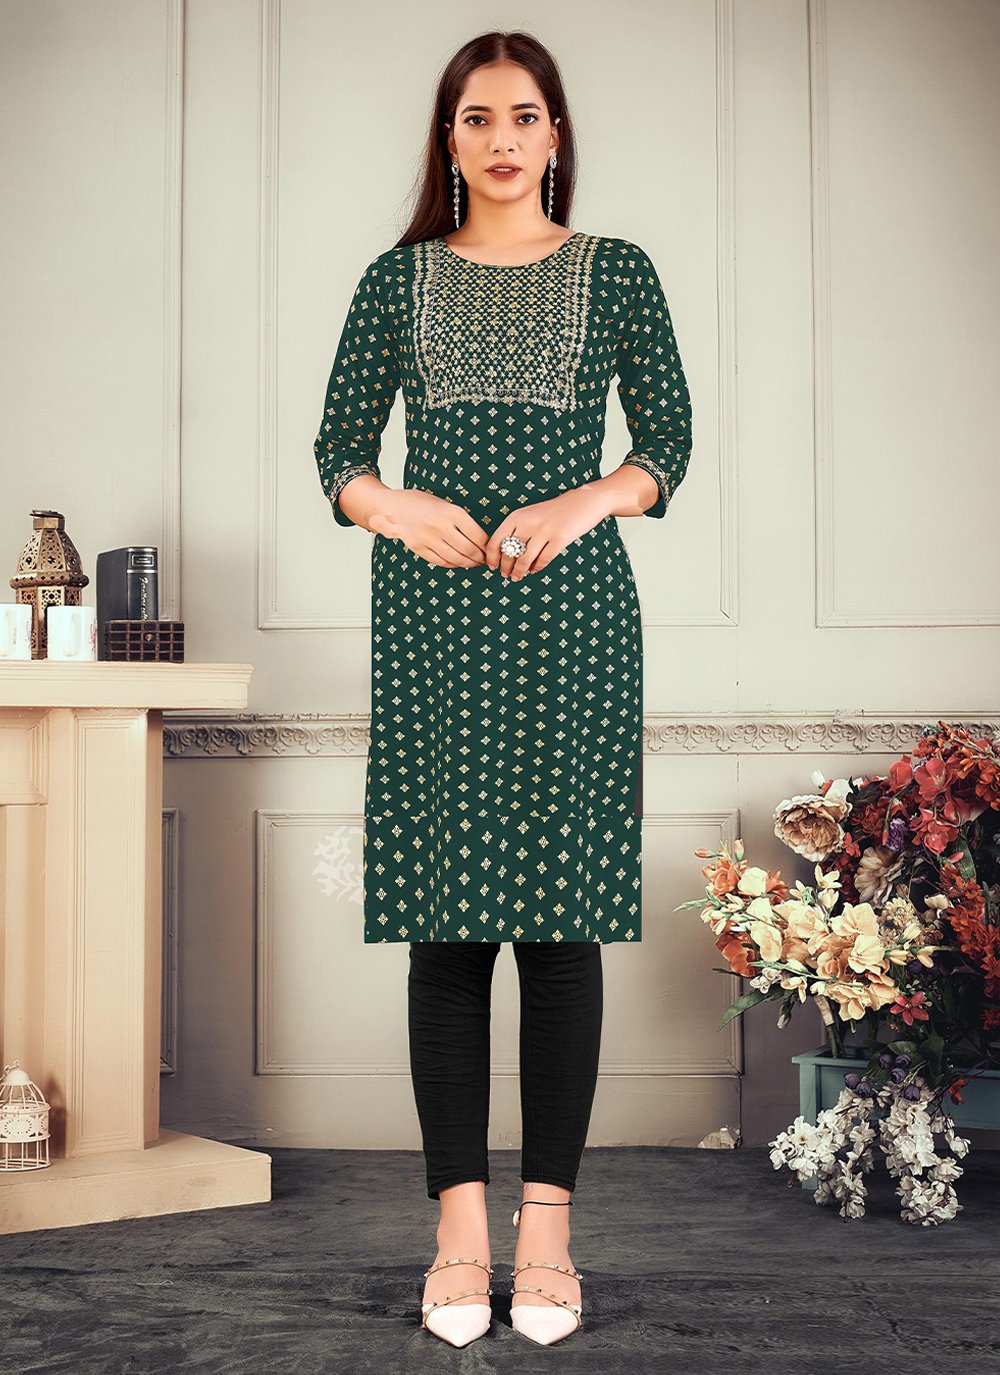 Embroidered Rayon Party Wear Kurti